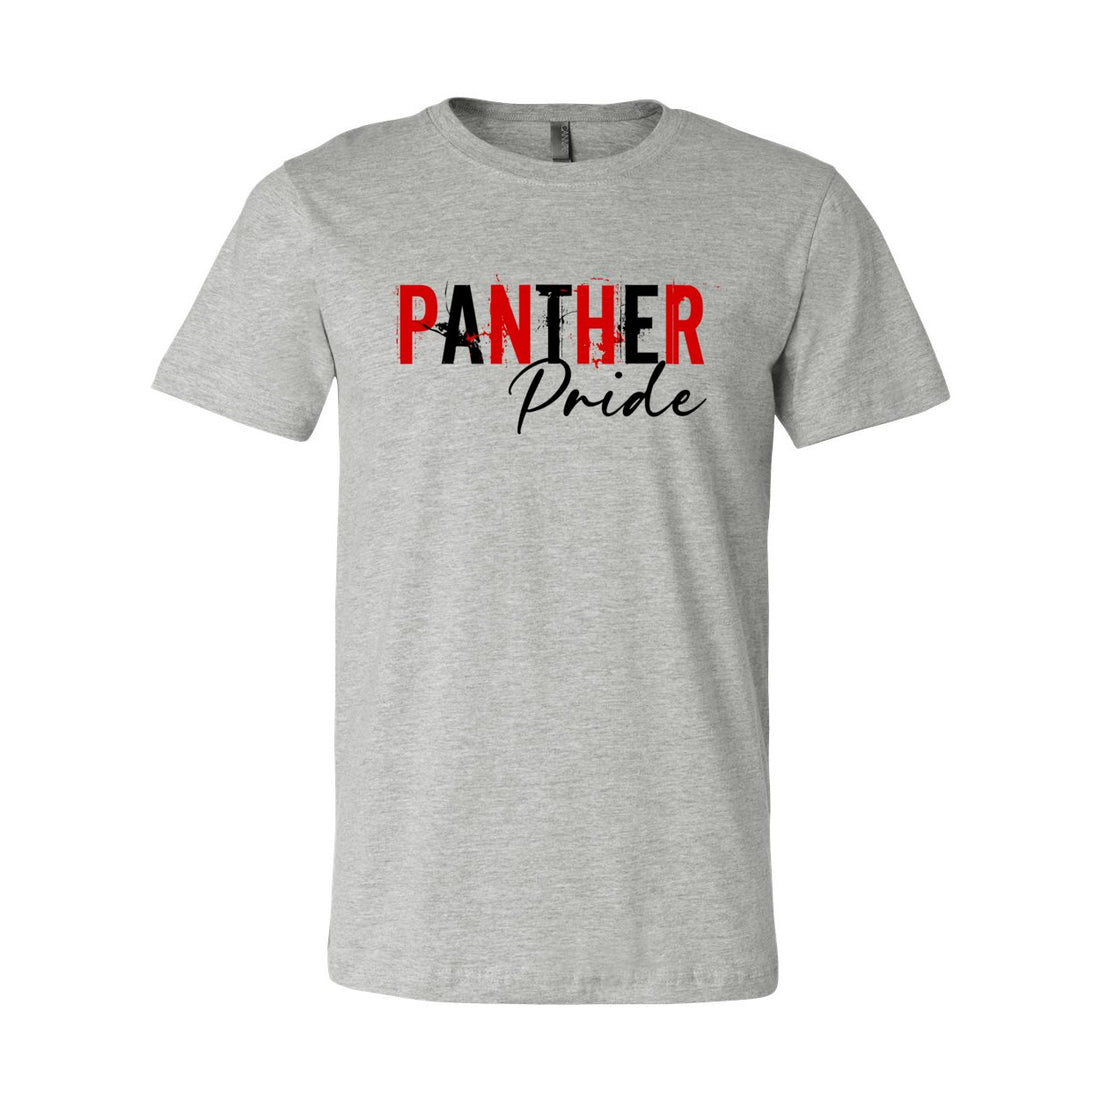 Panther Pride Remix Short Sleeve Jersey Tee - T-Shirts - Positively Sassy - Panther Pride Remix Short Sleeve Jersey Tee